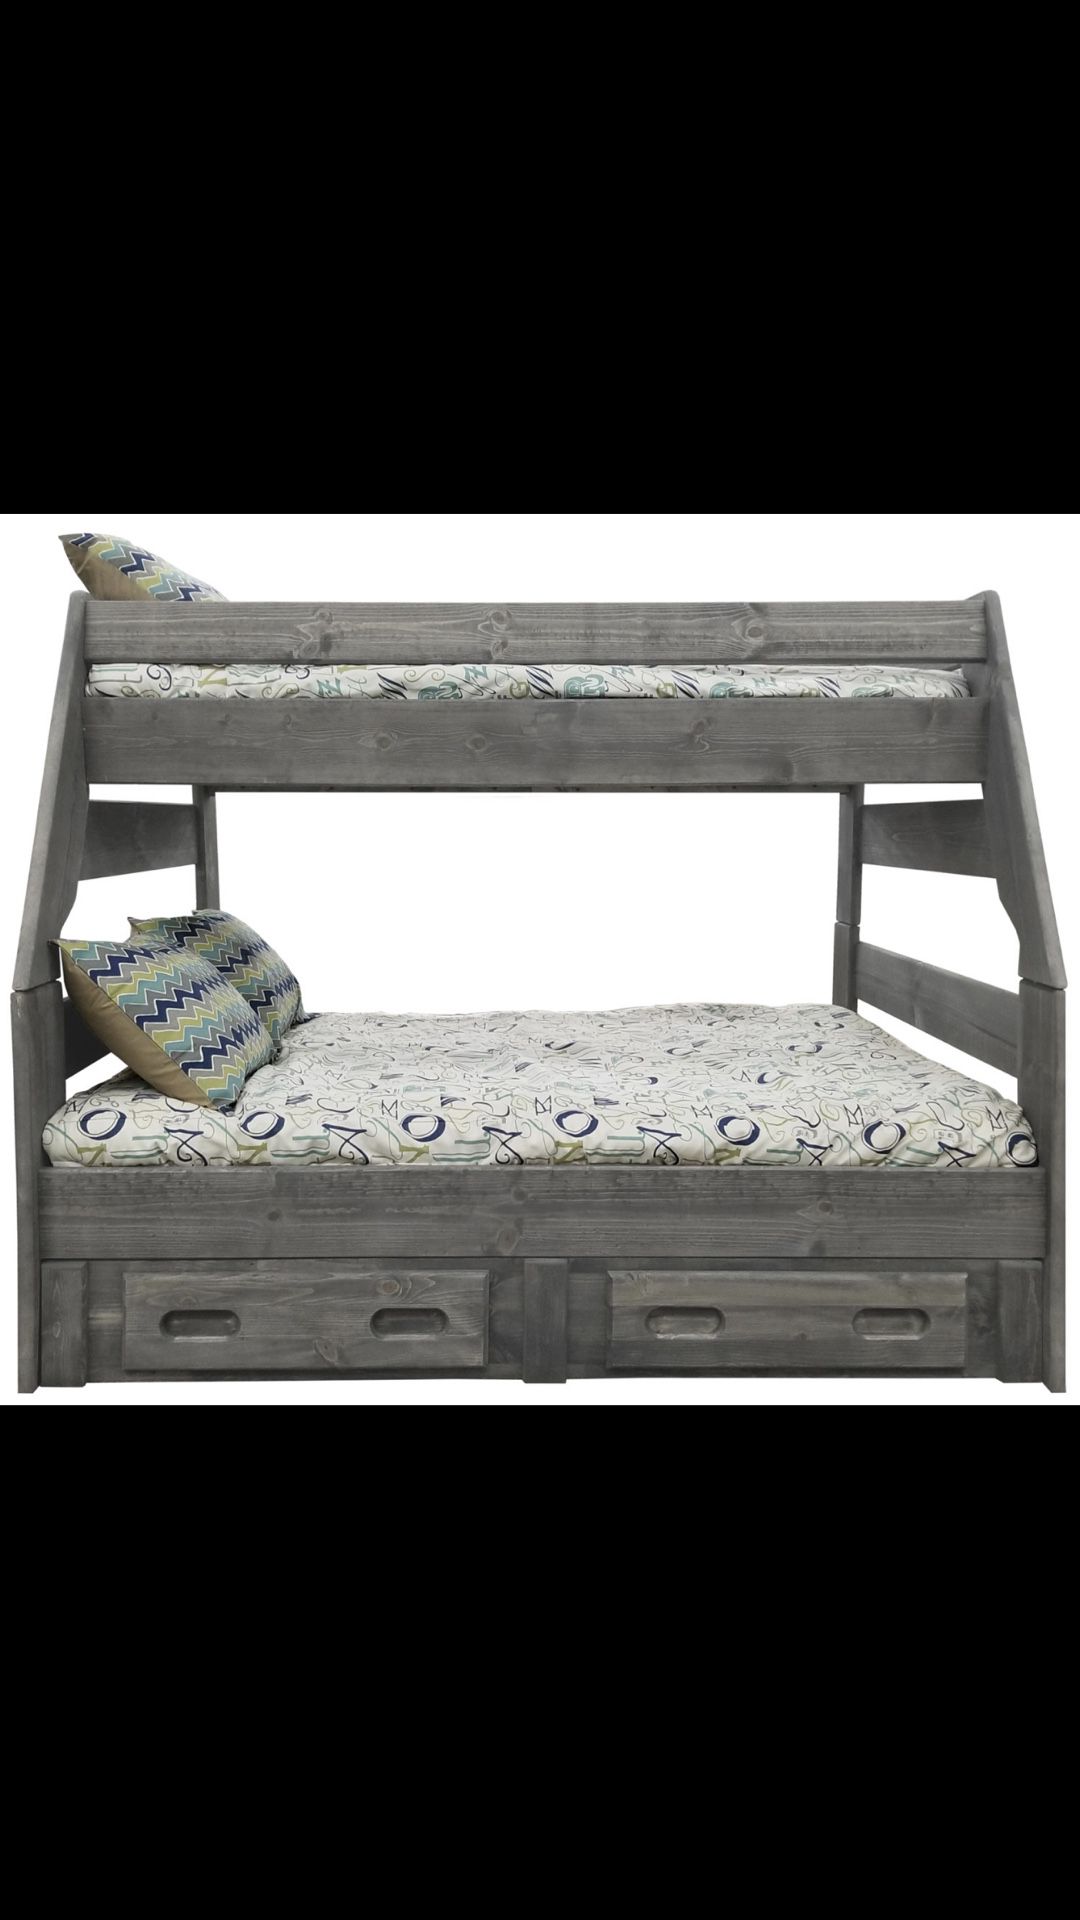 Children’s Bunk Bed Reduced price